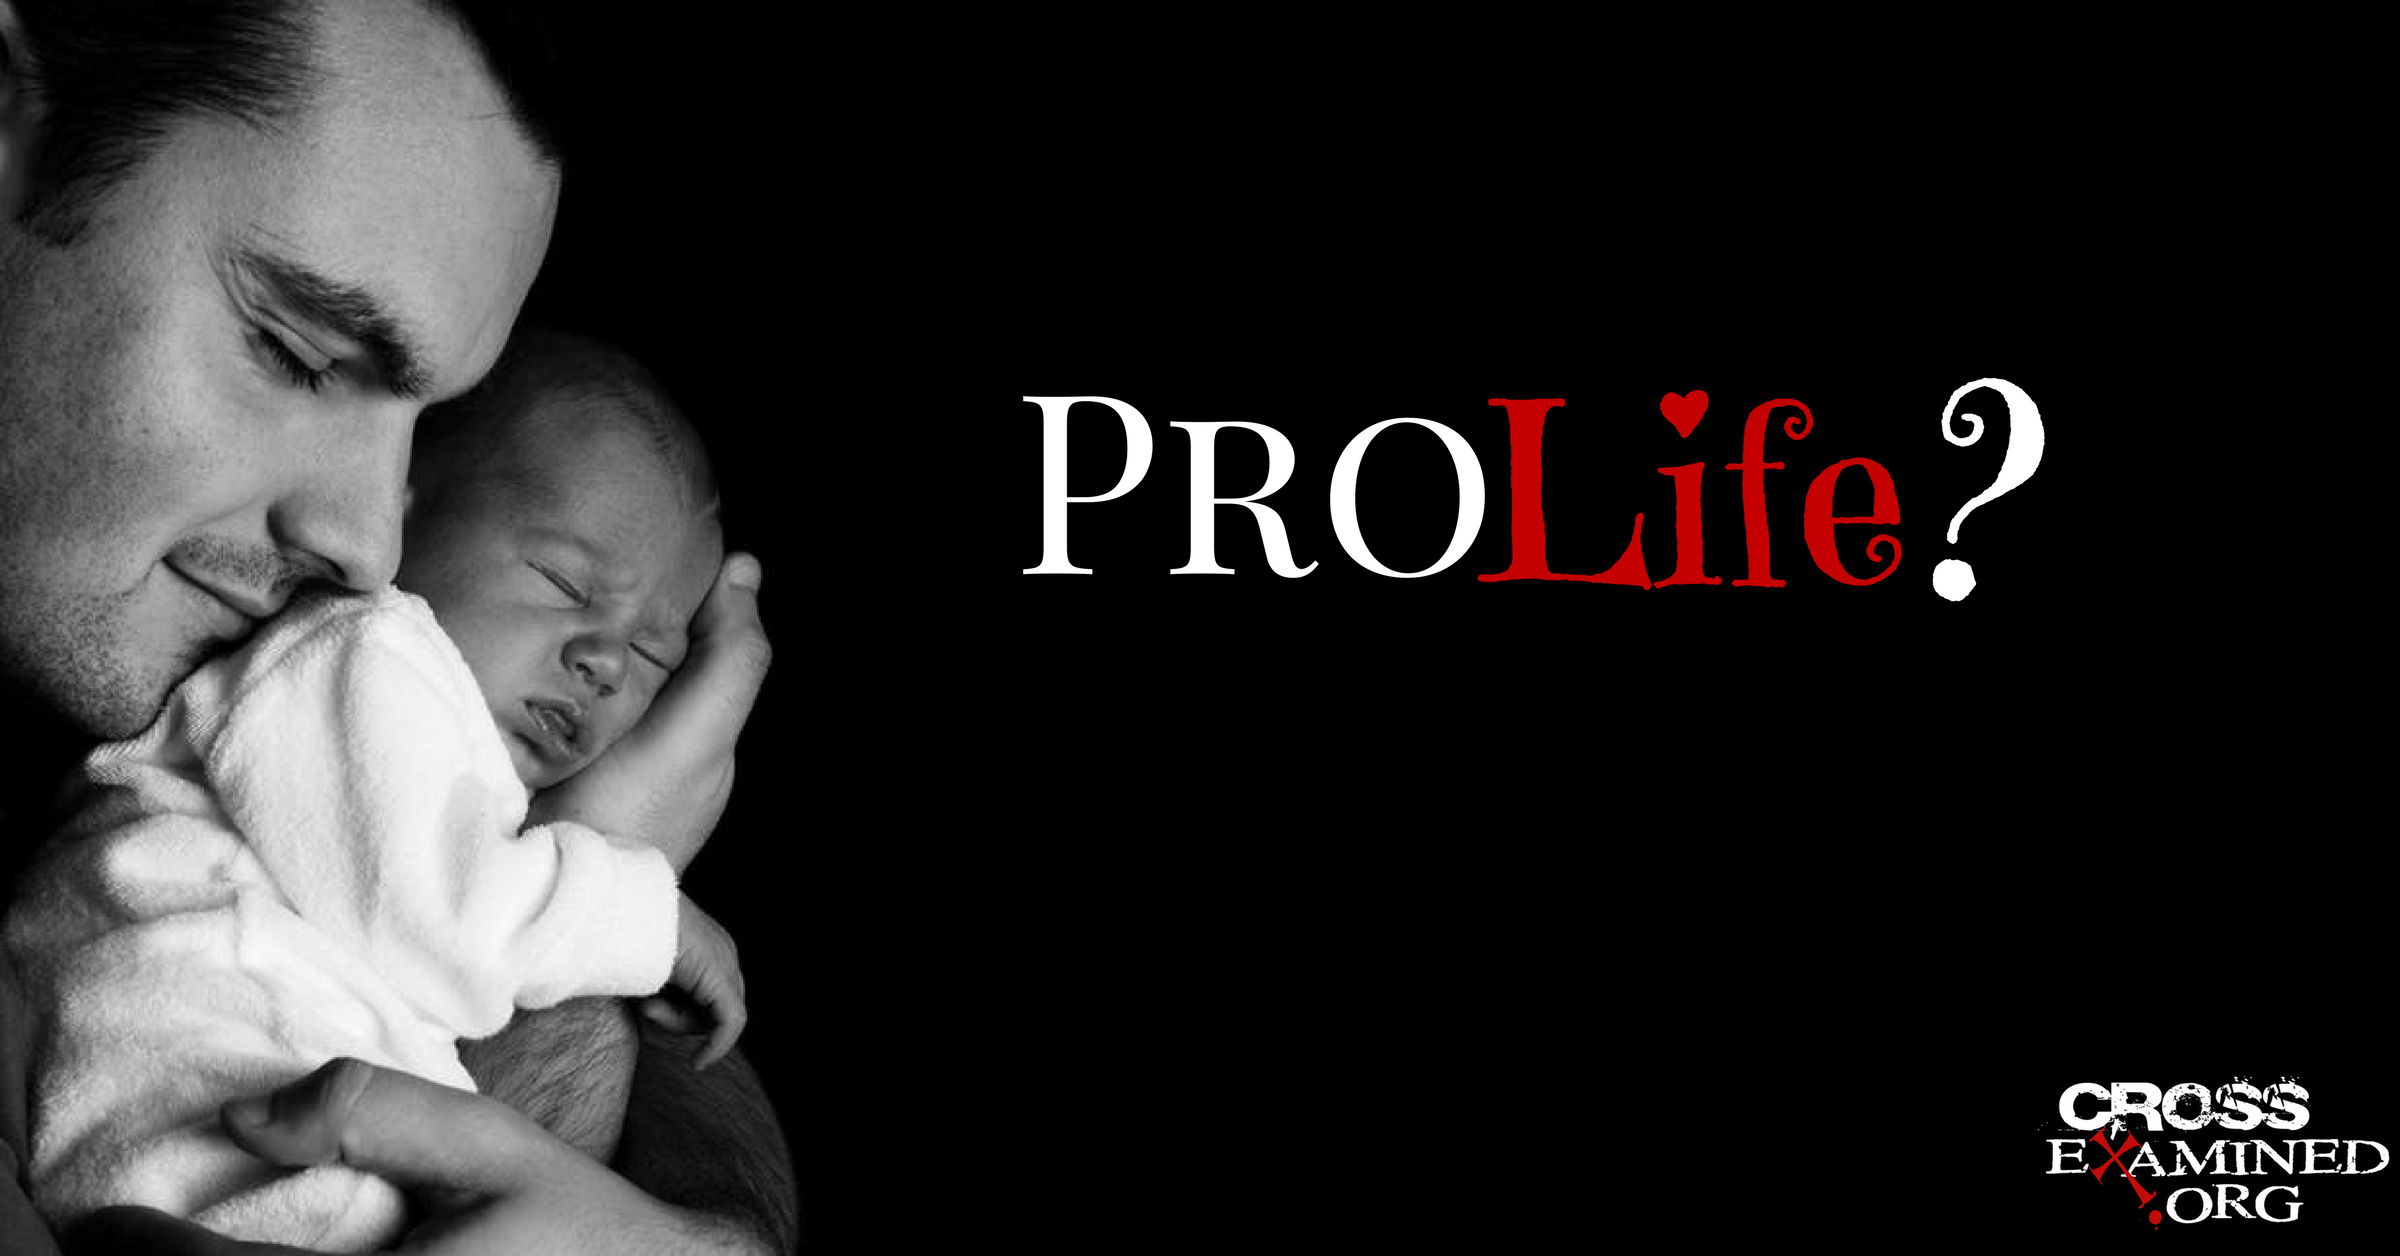 A Response To The “You’re Not Pro-Life Unless” Movement